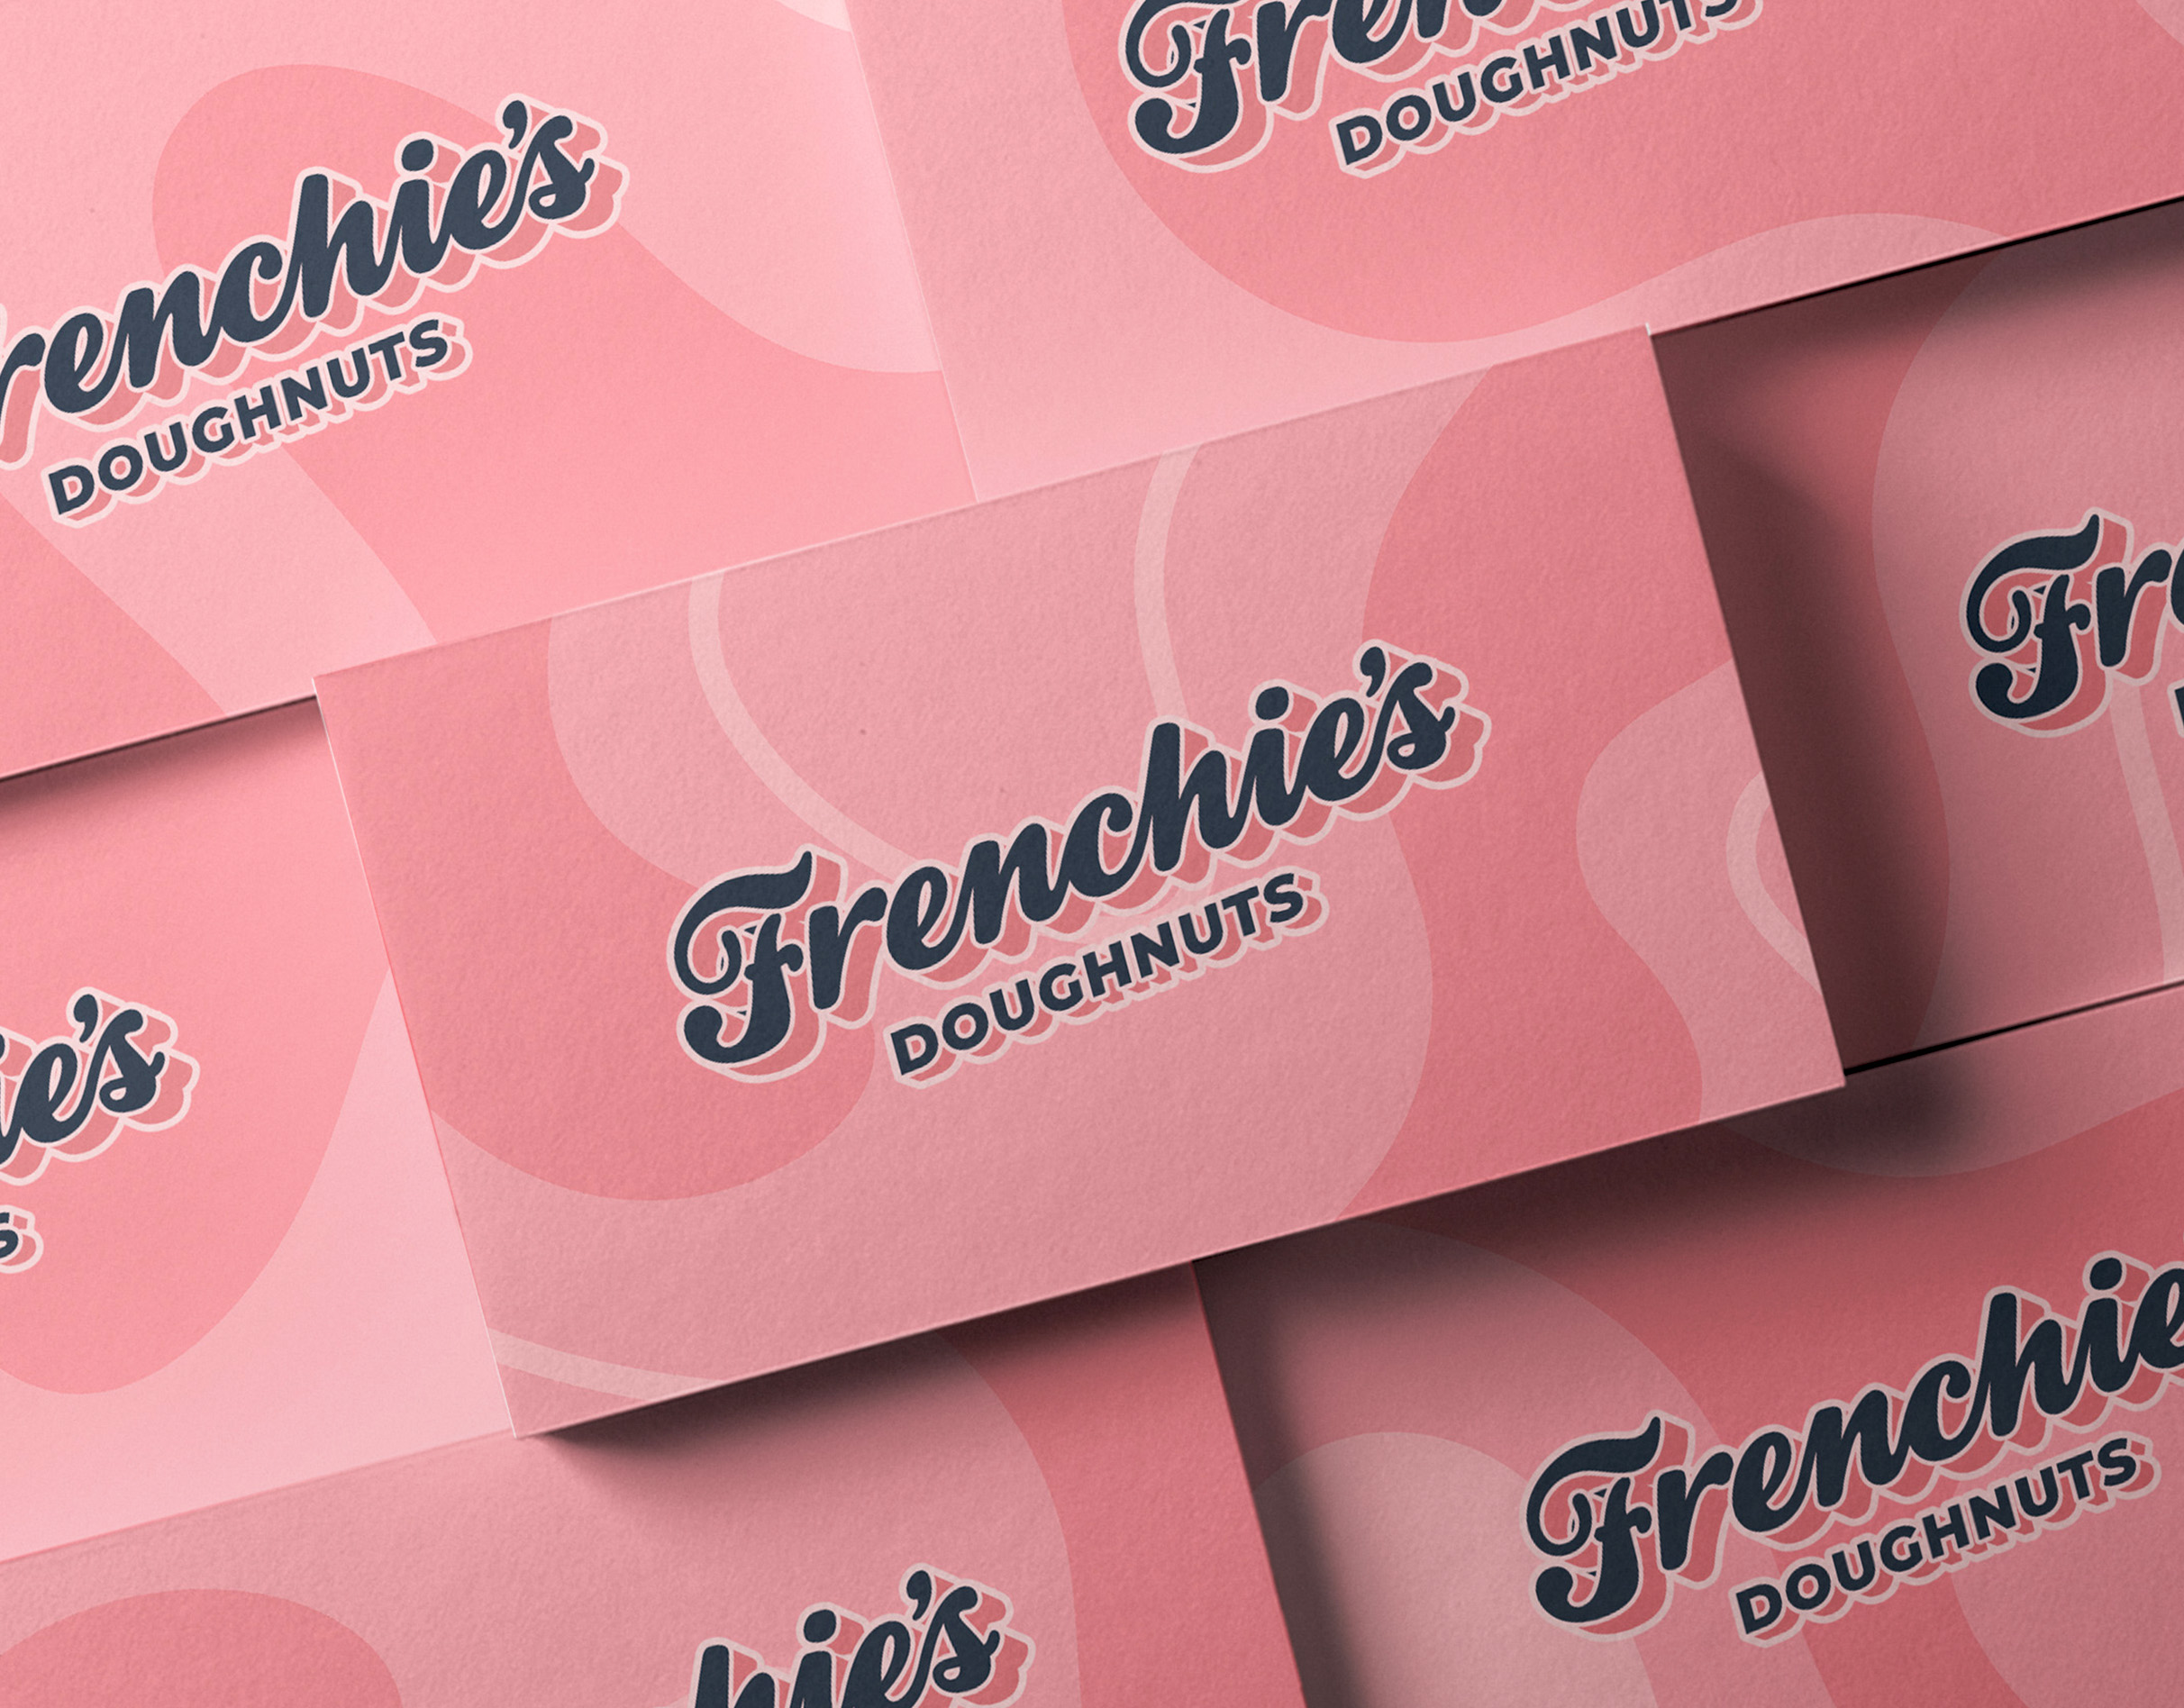 Frenchie’s Doughnuts Identity Design by Kenneth Manuel